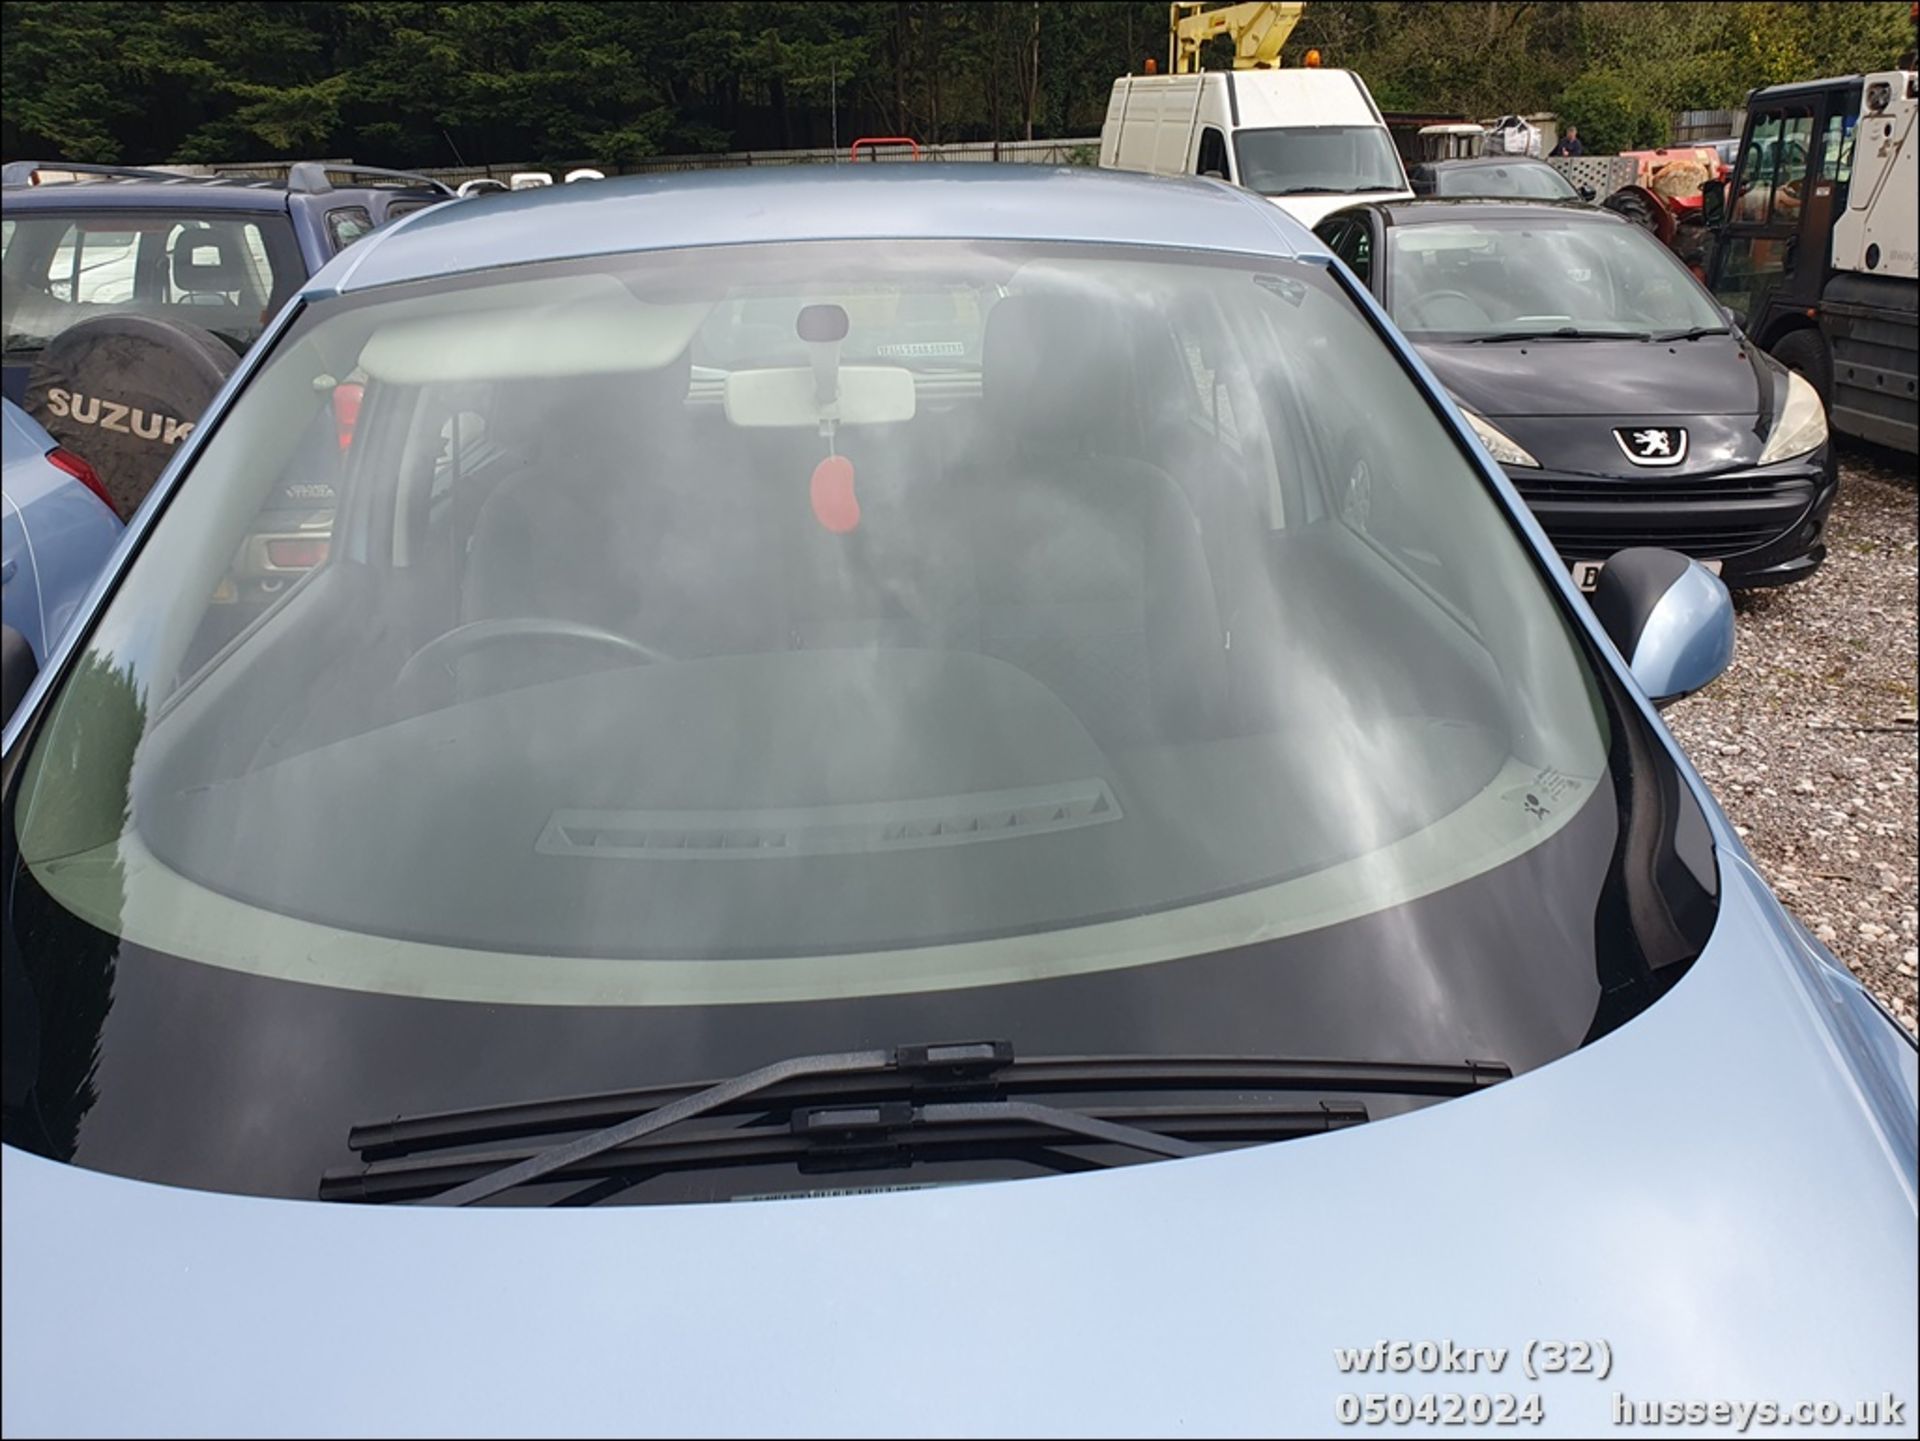 10/60 RENAULT SCENIC EXPRESSION DCI 105 - 1461cc 5dr MPV (Blue) - Image 33 of 50